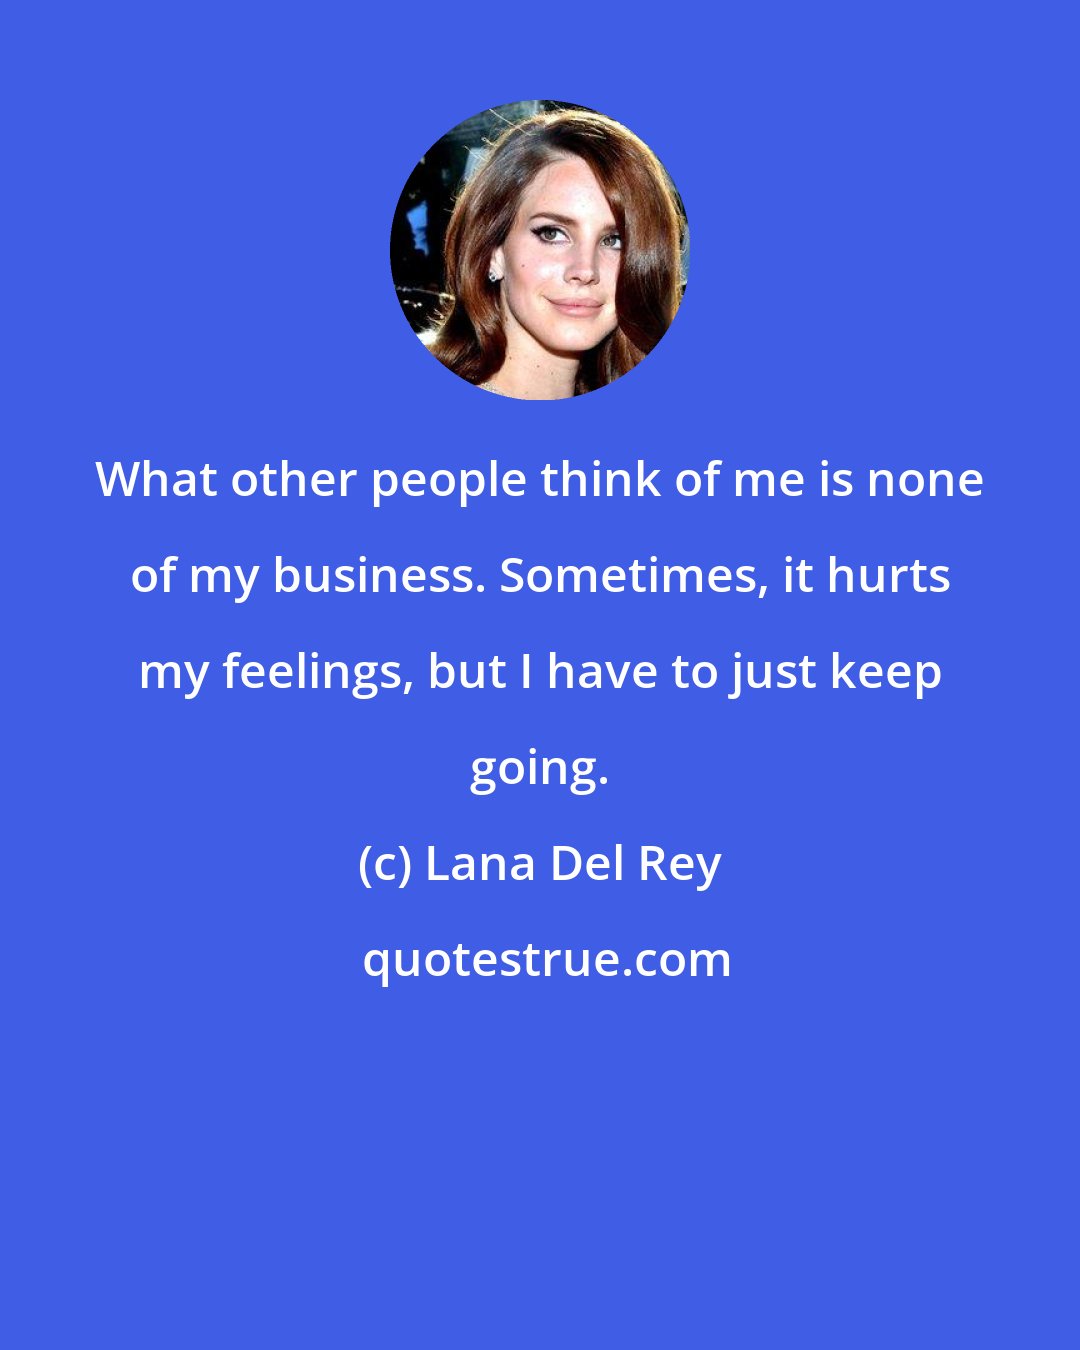 Lana Del Rey: What other people think of me is none of my business. Sometimes, it hurts my feelings, but I have to just keep going.